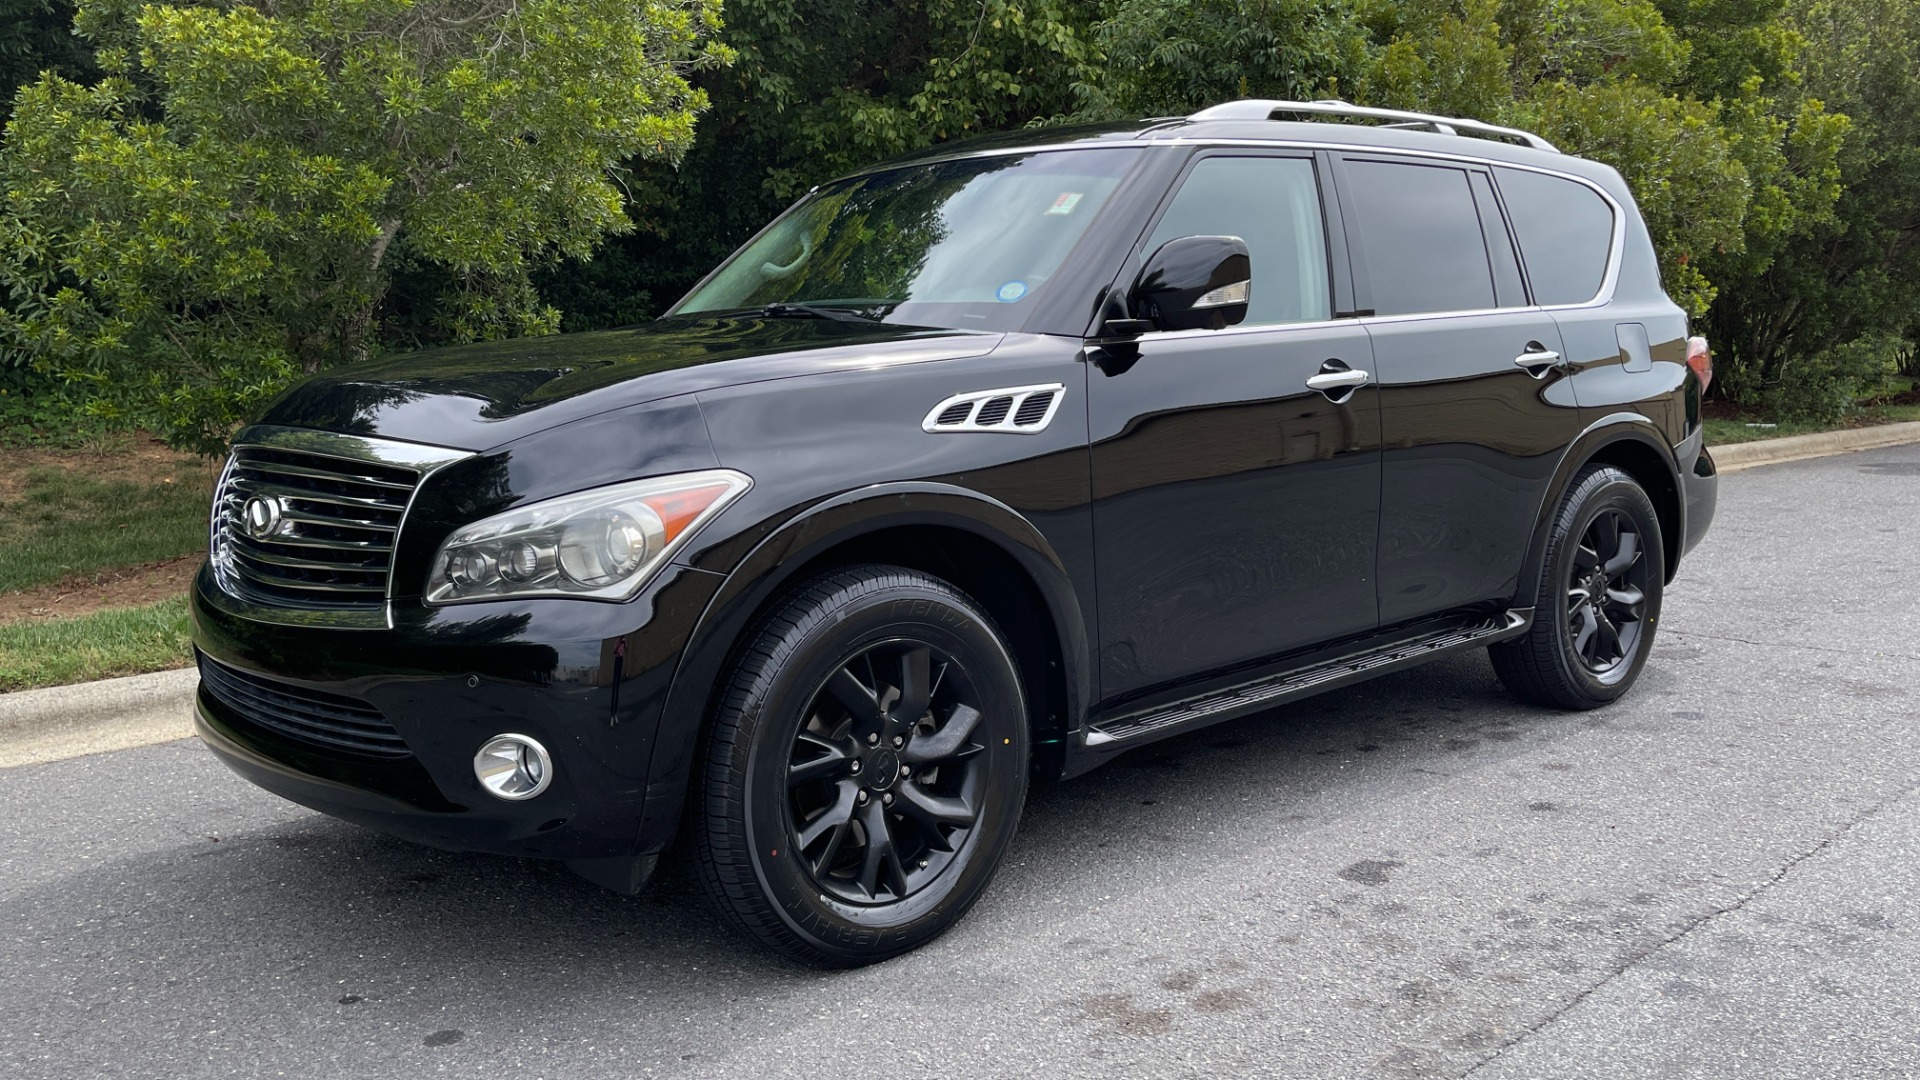 Used 2012 INFINITI QX56 7 PASSENGER / THEATER PACKAGE / HEATED SEATS / NAV / REARVIEW for sale Sold at Formula Imports in Charlotte NC 28227 50